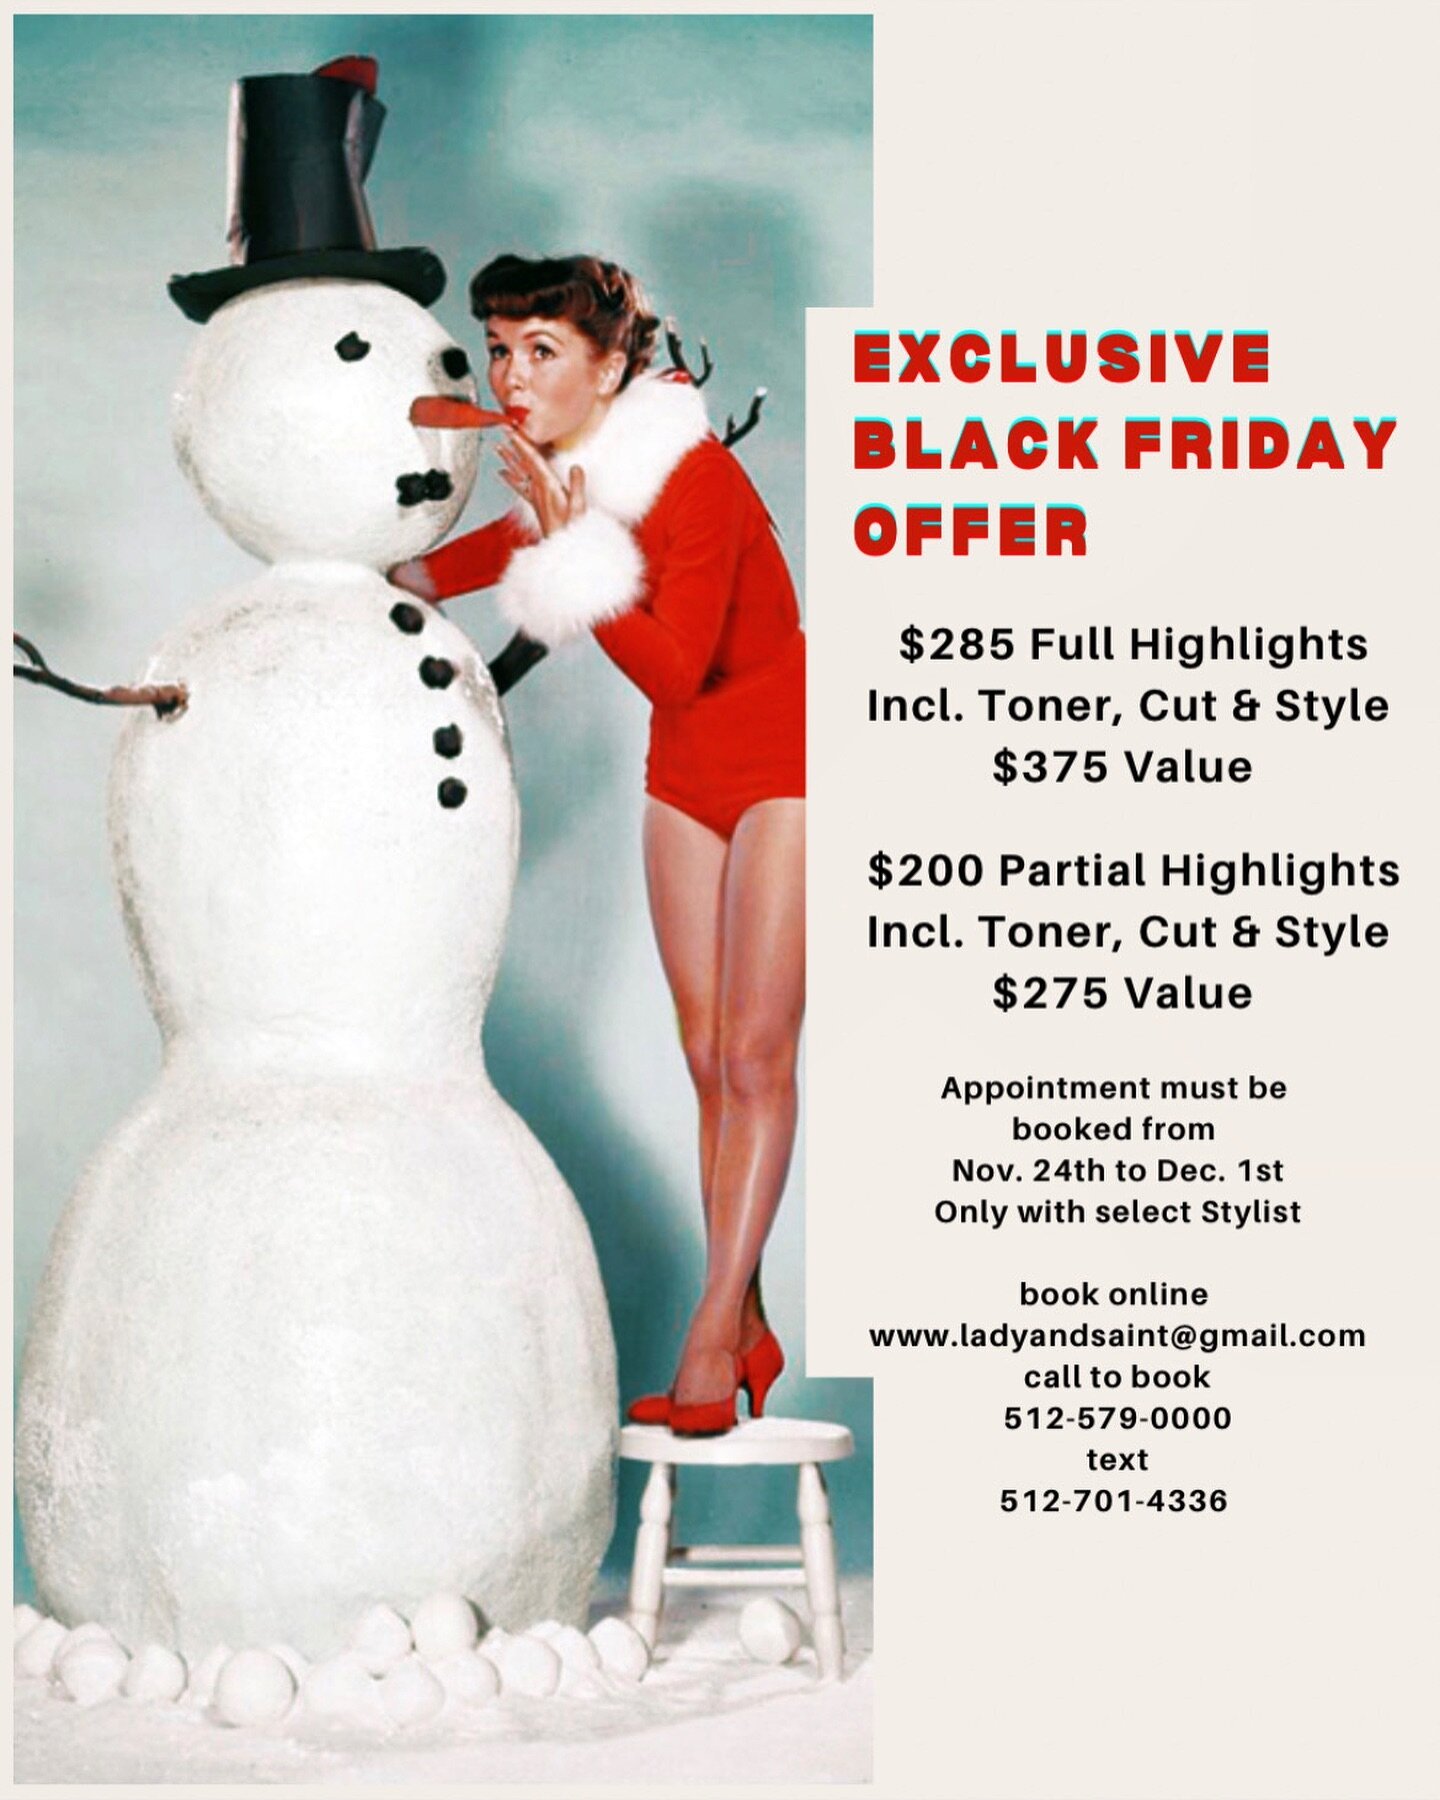 🎄 Exclusive Black Friday Offer 🎄
.
Take advantage of this deal now because it goes away as of Dec. 1st. 
.
$285 for Full Highlights, Toner, Cut and Style 
.
$200 for Partial Highlights, Toner, Cut and Style 
.
Don&rsquo;t get stuck with boring hair